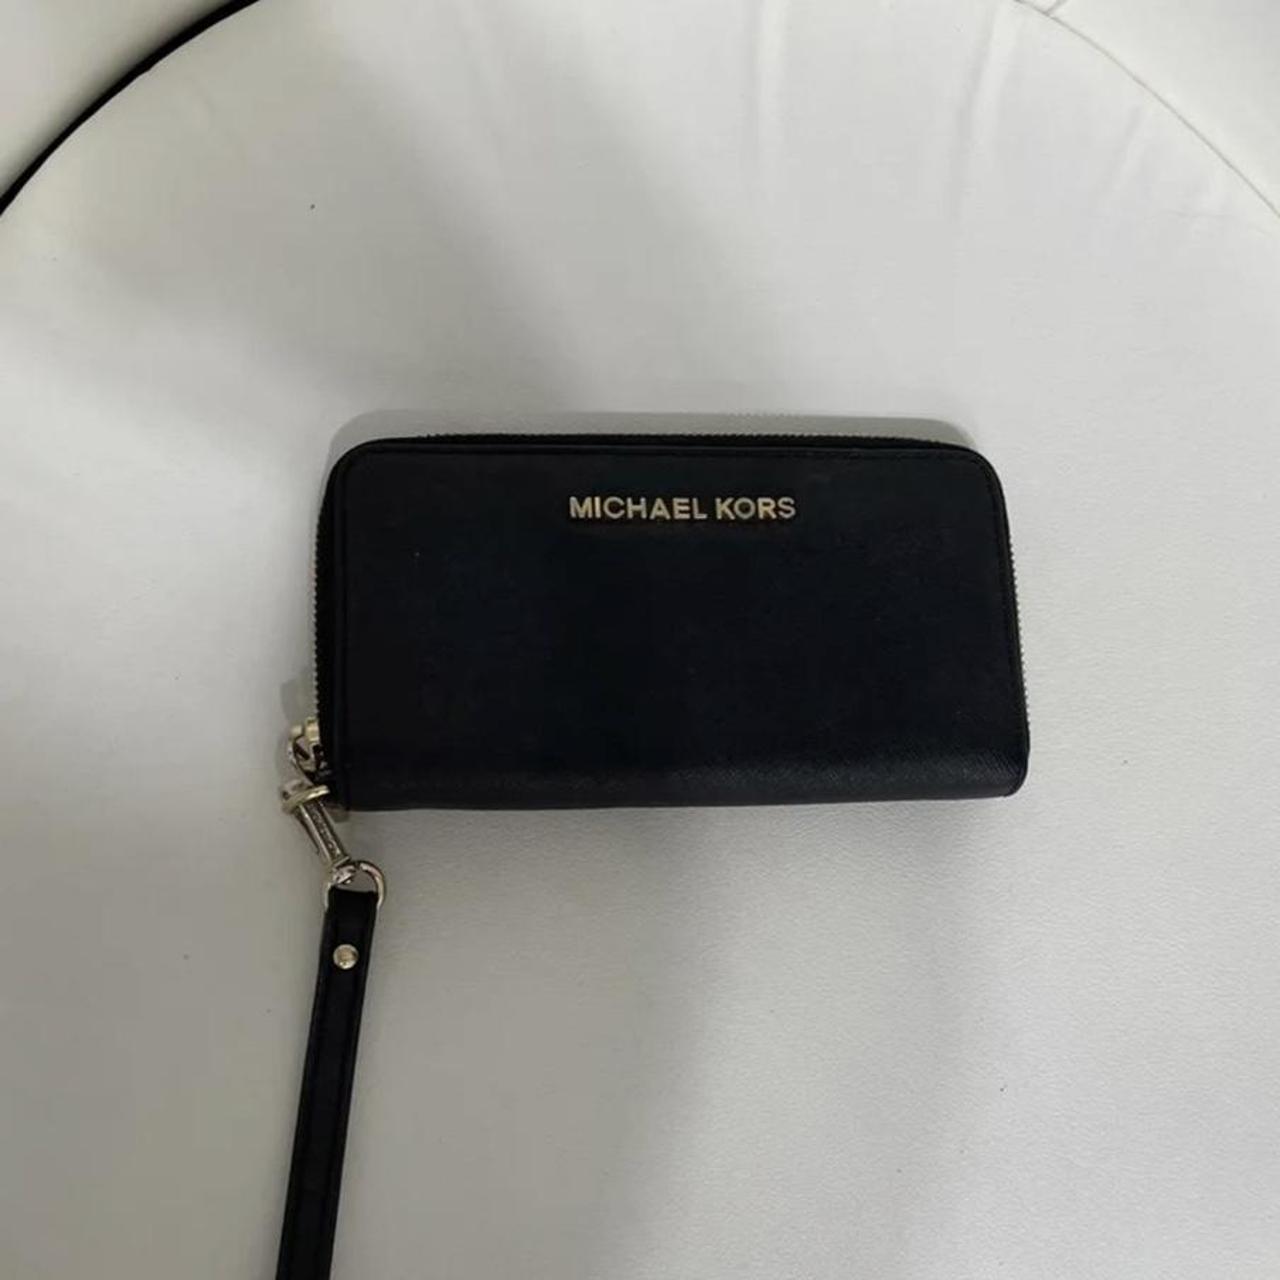 Product Image 1 - Michael kors black wallet

TRYING TO